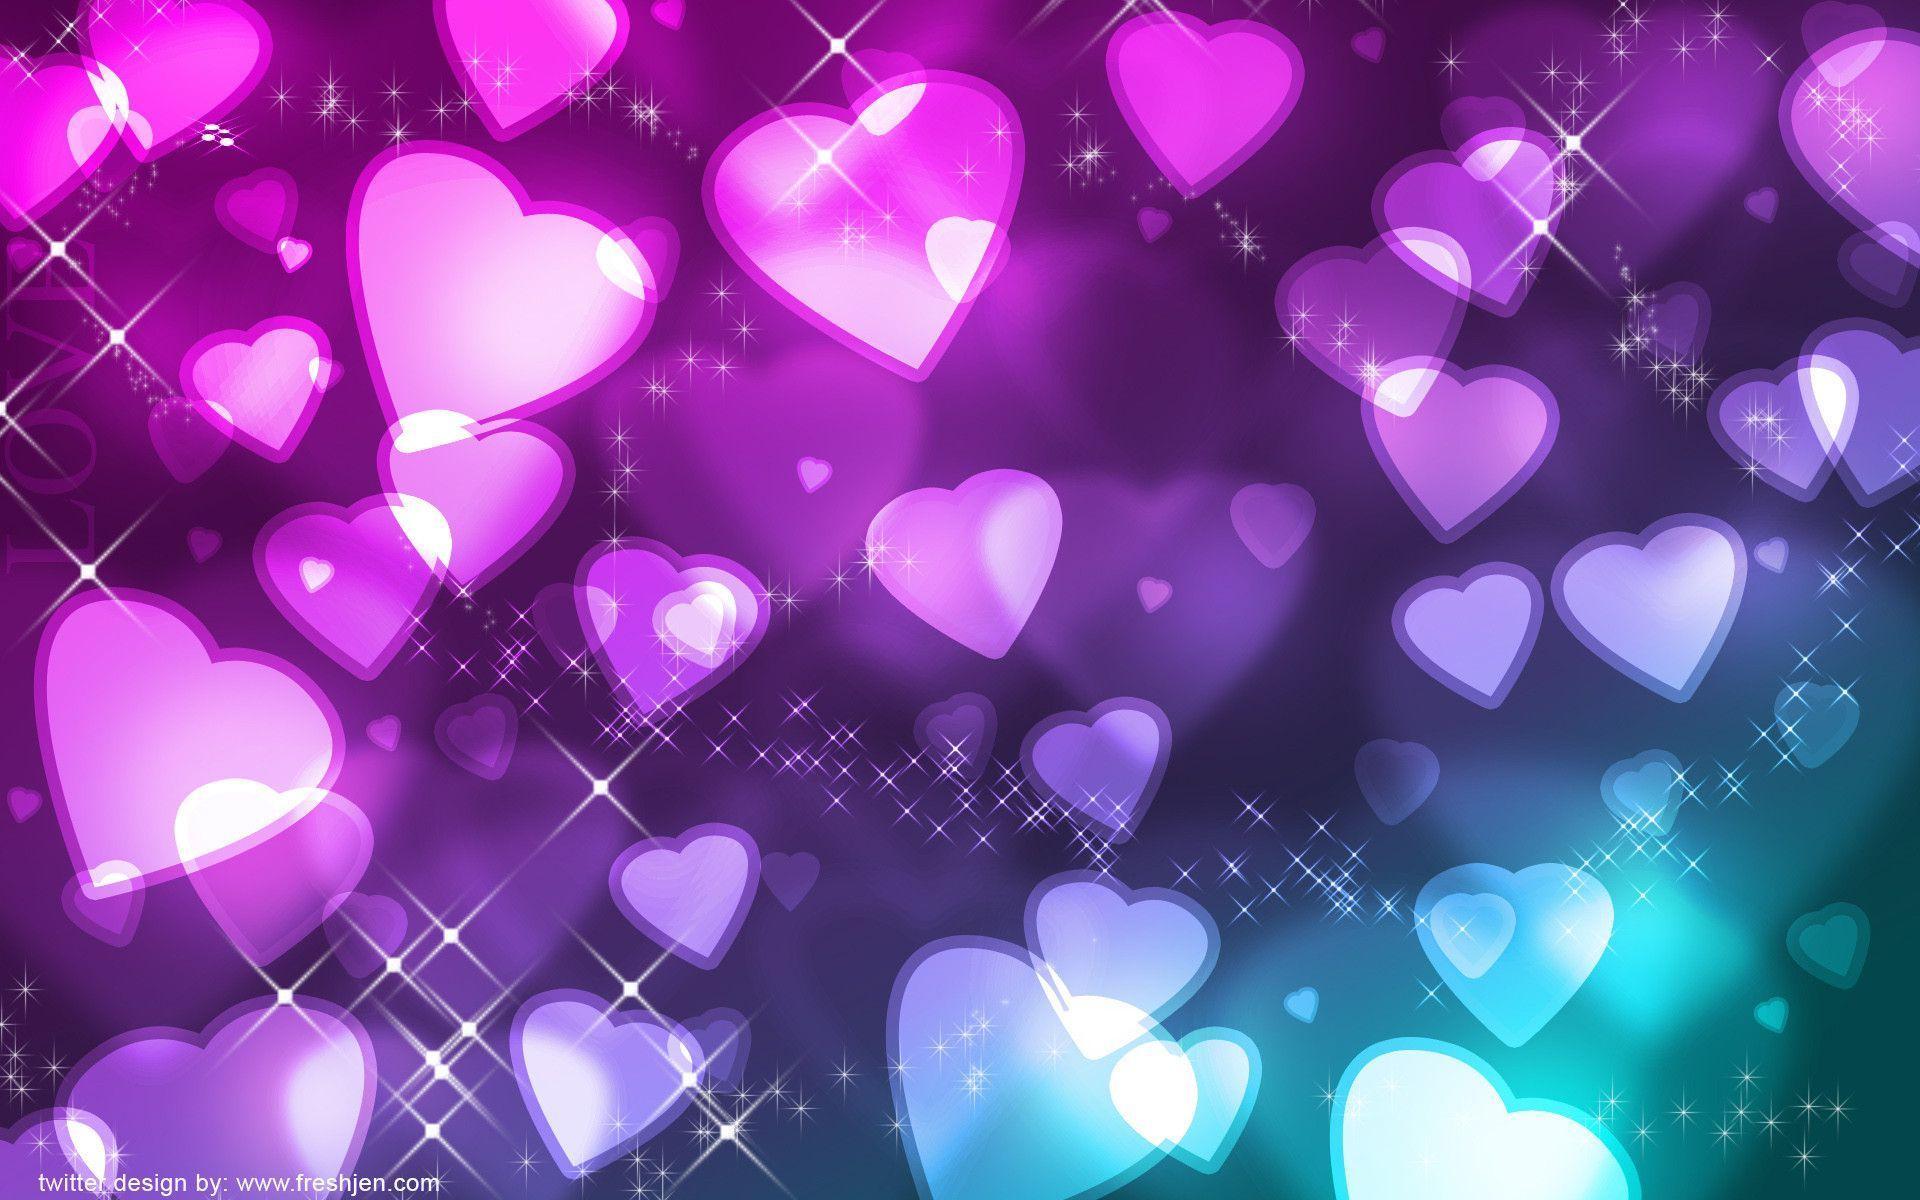 Wallpaper For > Wallpaper Of Hearts And Stars